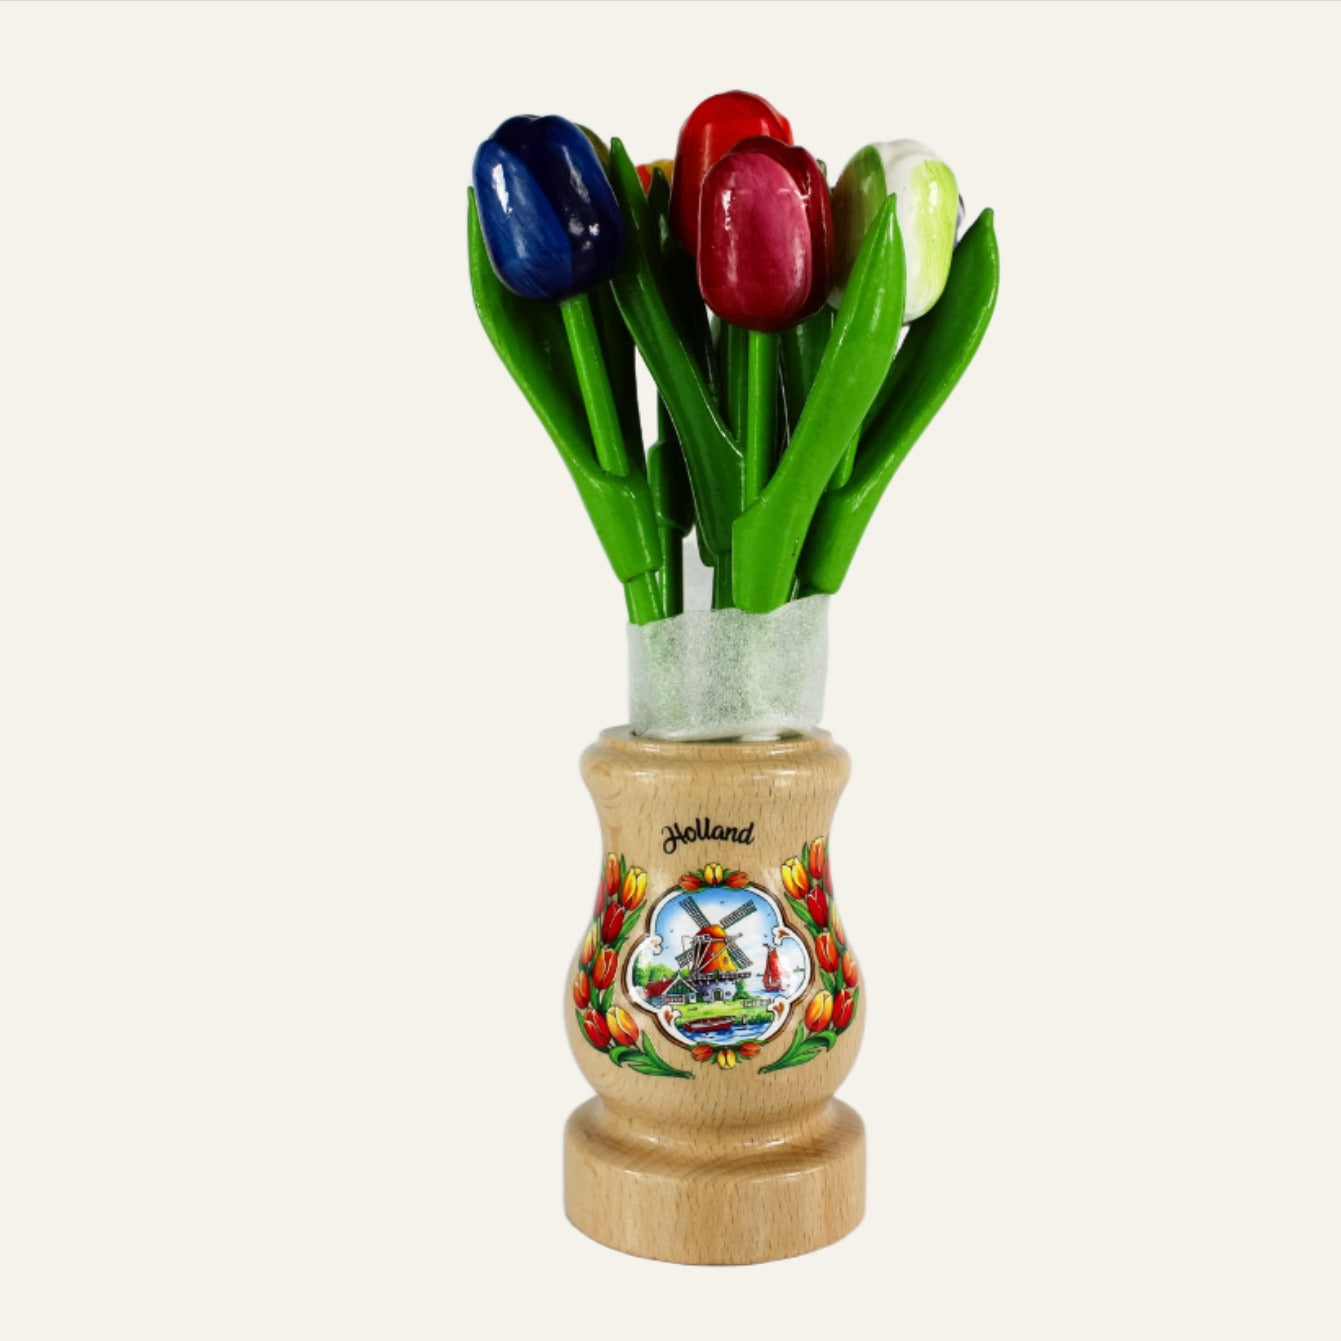 Dutch Groceries 9 Tulip Bouquet Small in Wooden Vase Varnished